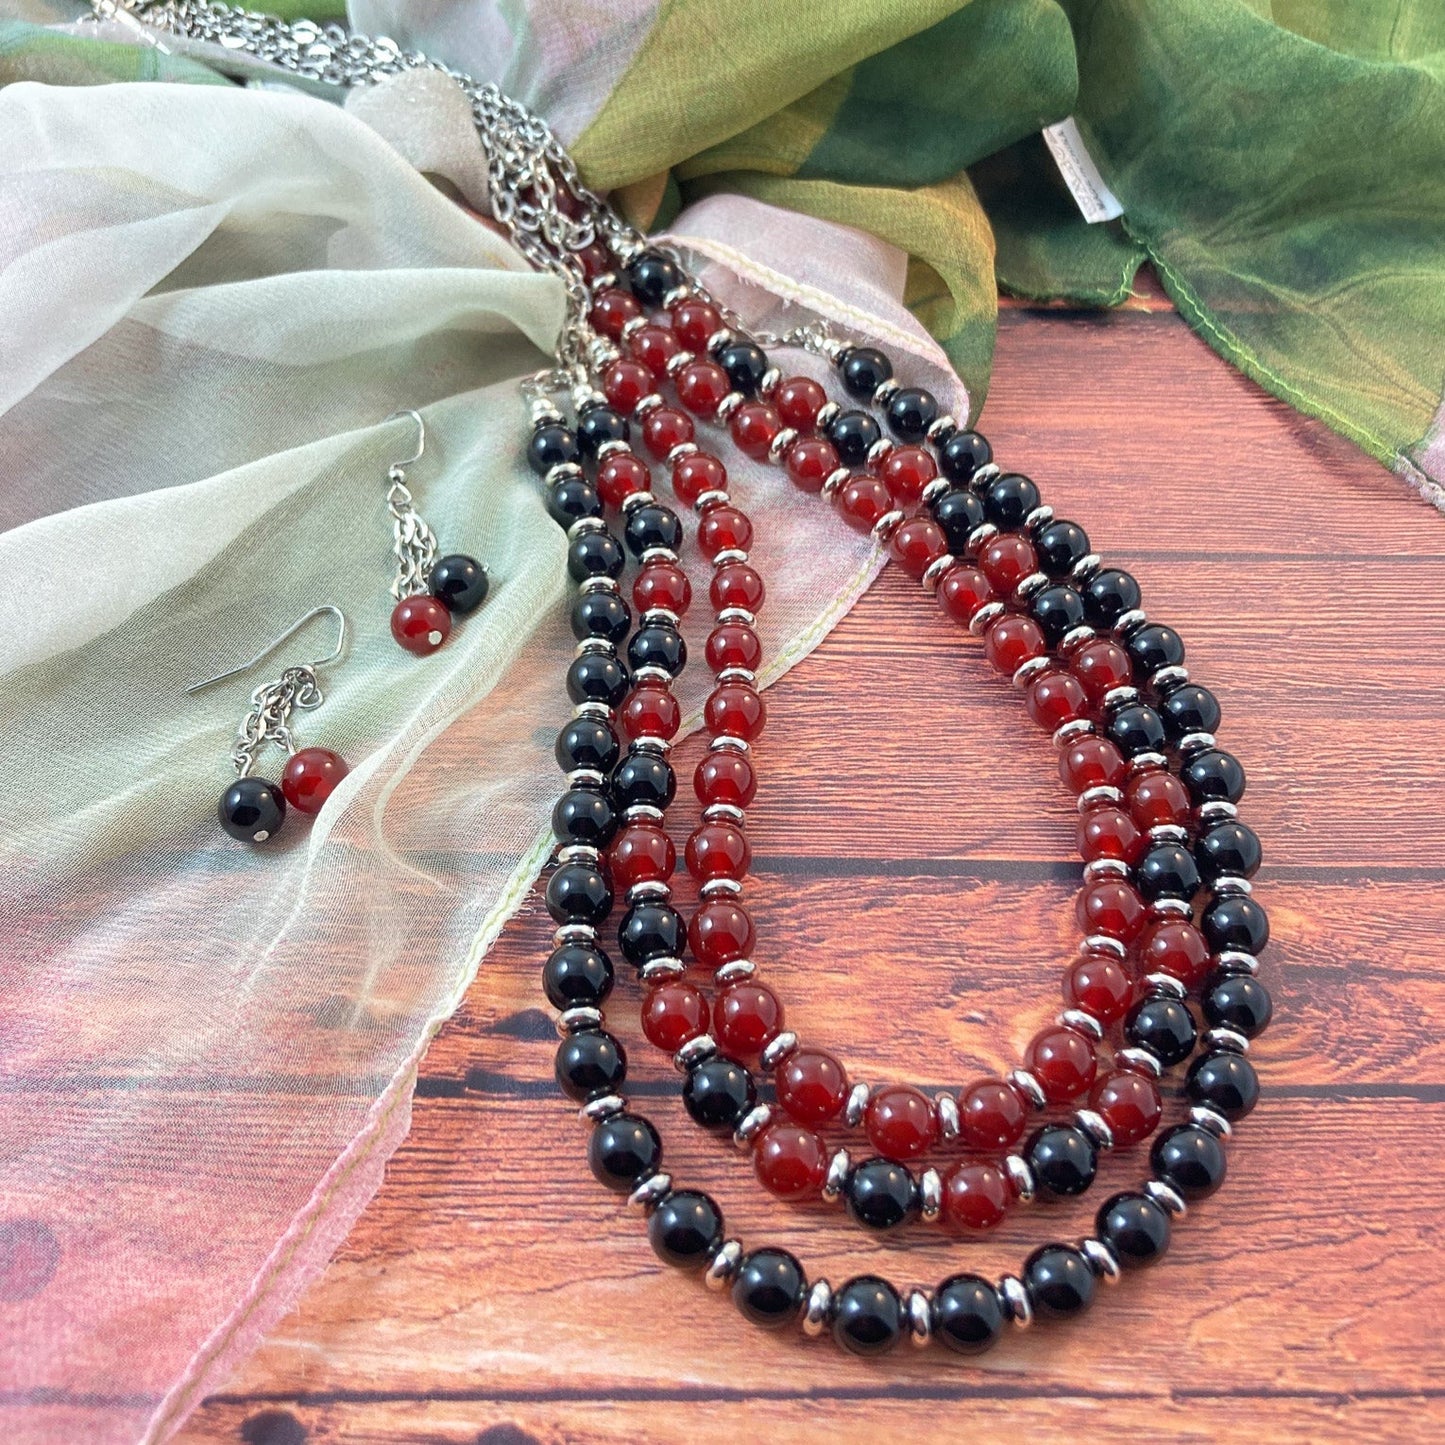 FTNS35 - 3 Strand Red, Black & Silver Necklace w/ Earrings